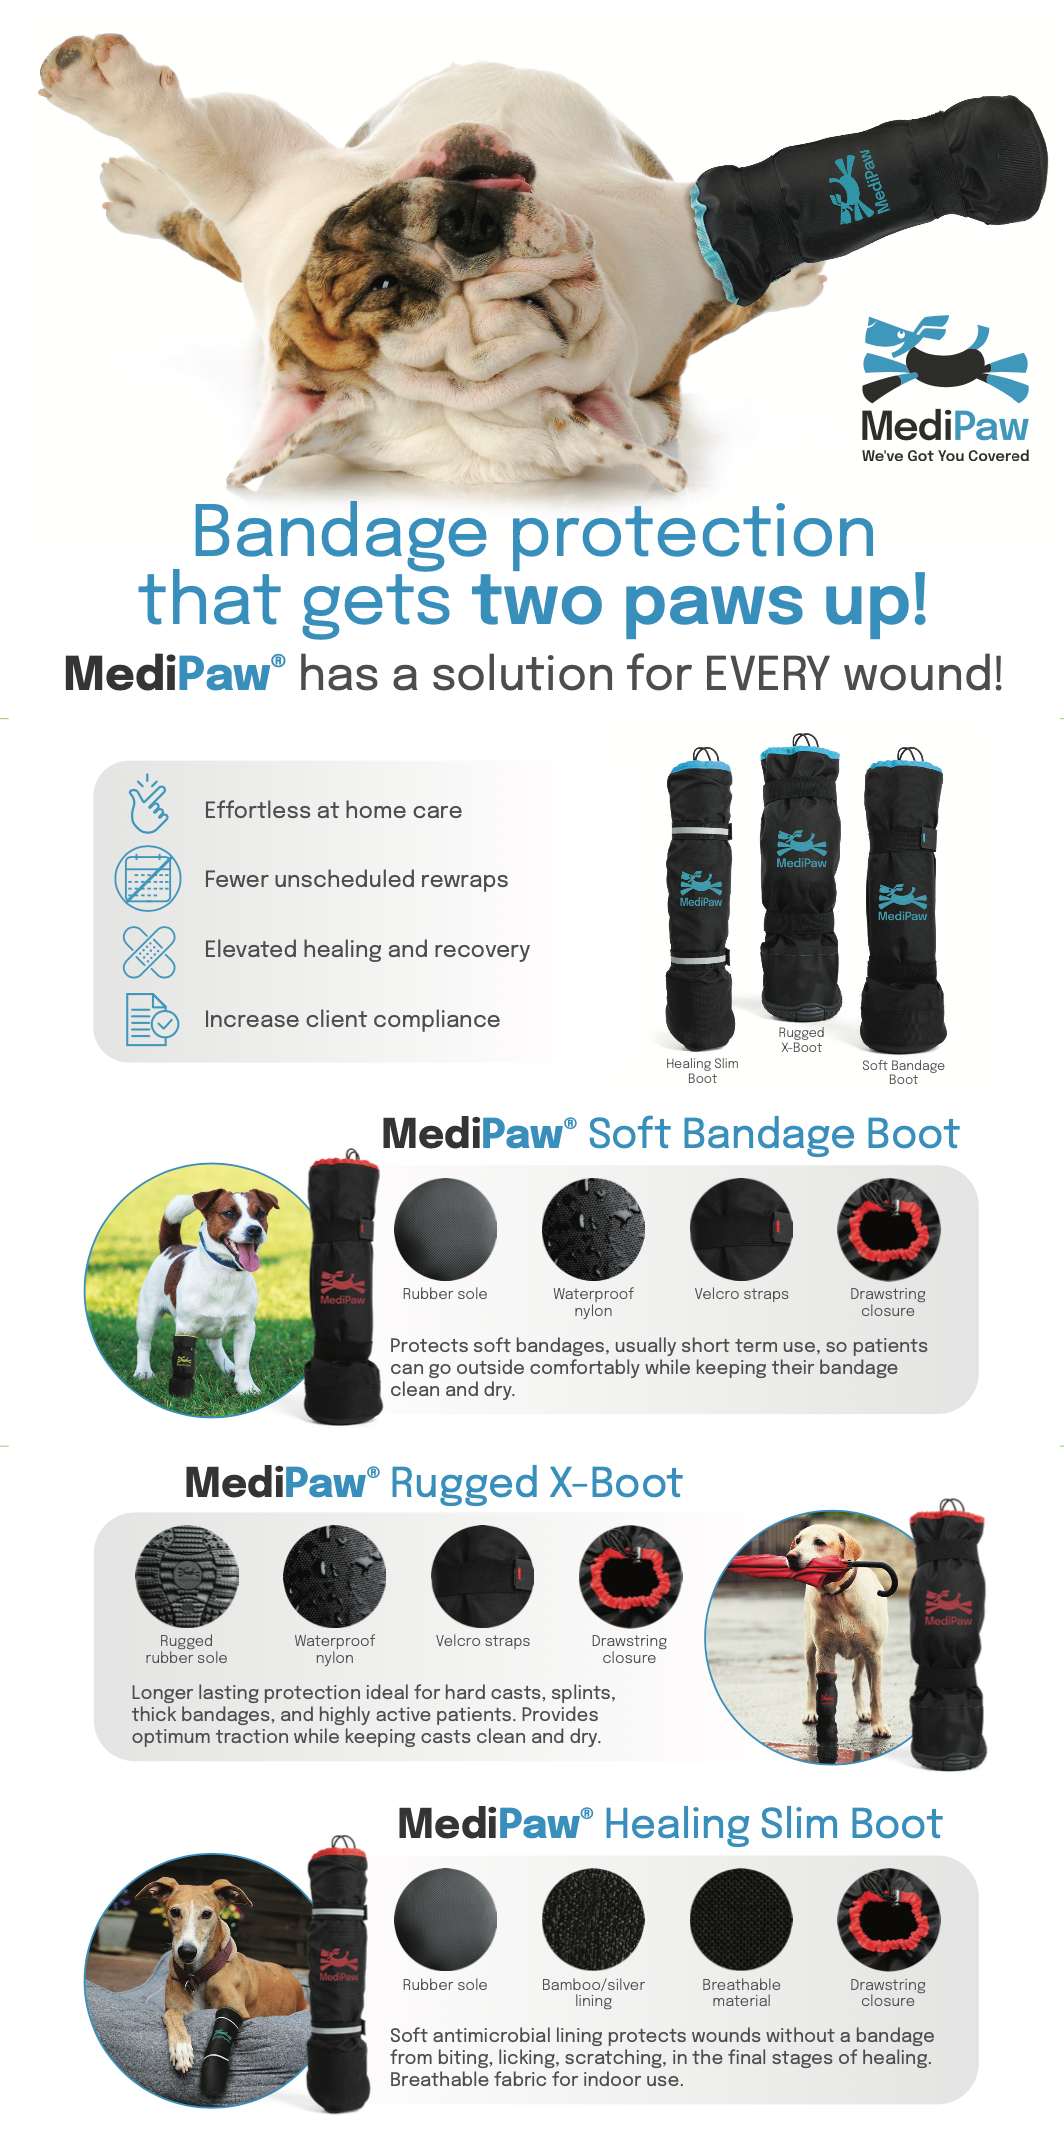 Your Whole Dog's MediPaw: Healing Slim Boot items provide bandage protection for dogs, including boots for added safety. Perfect for dog owners in Australia.